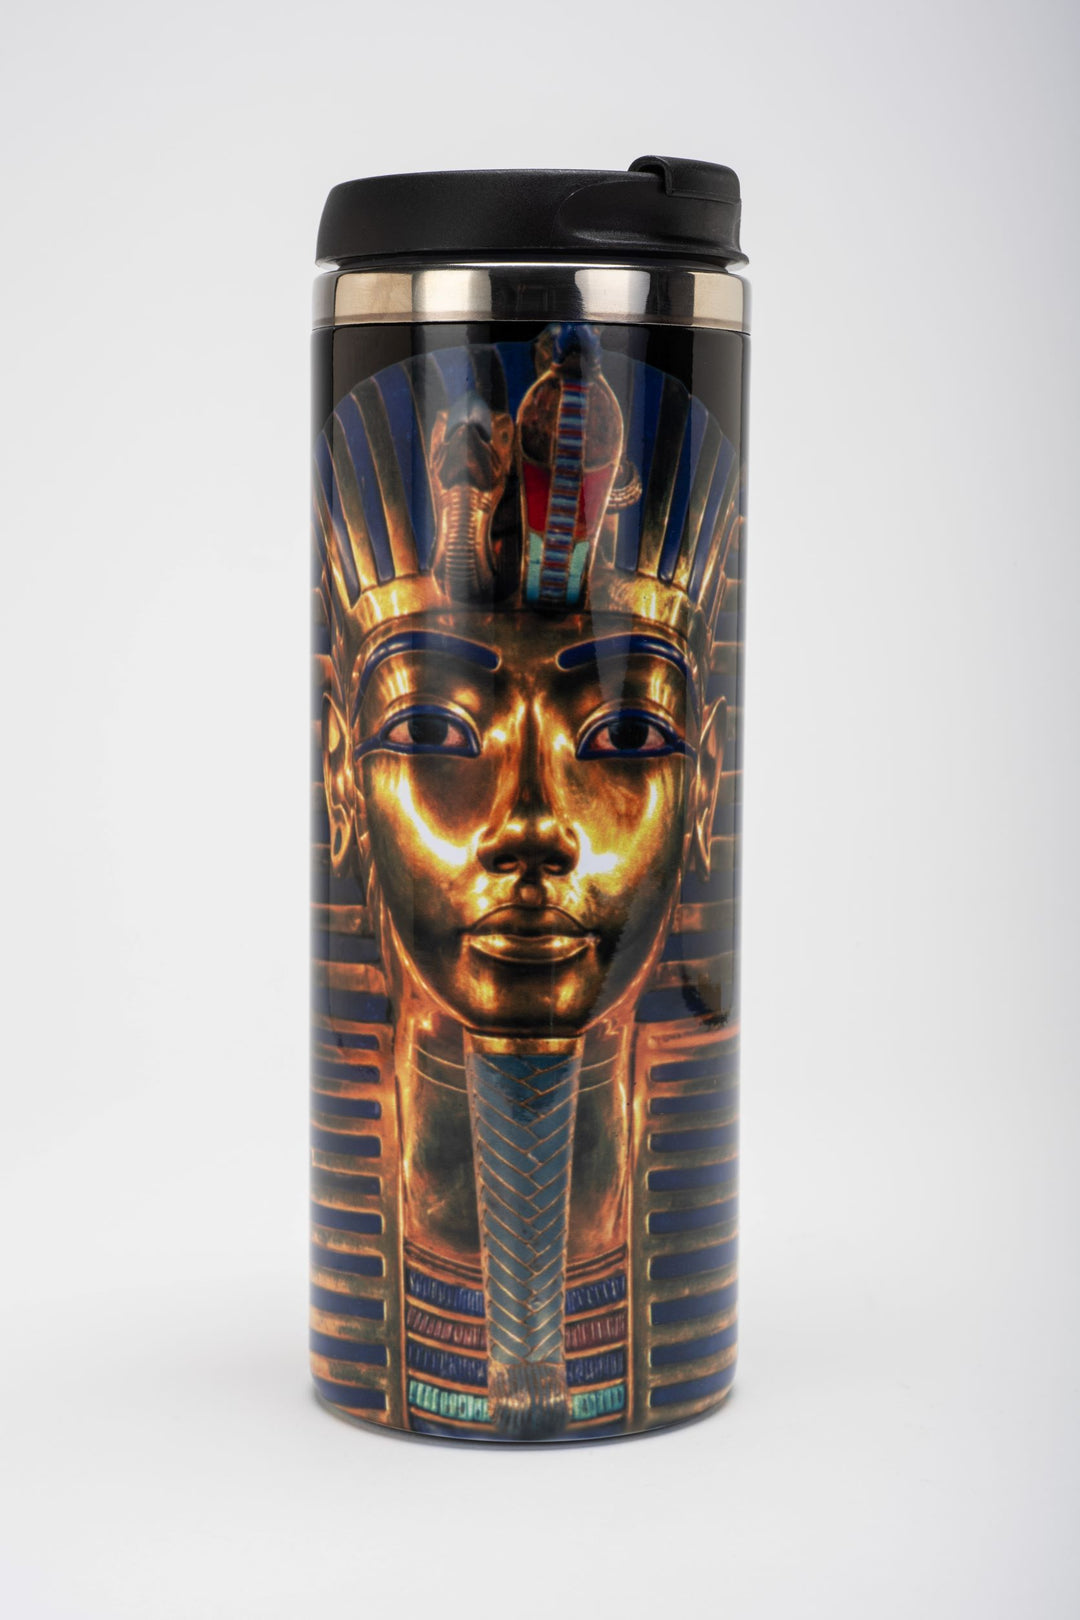 HMNS King Tut's Tomb Discovery Experience Tumbler, 14oz Stainless Steel